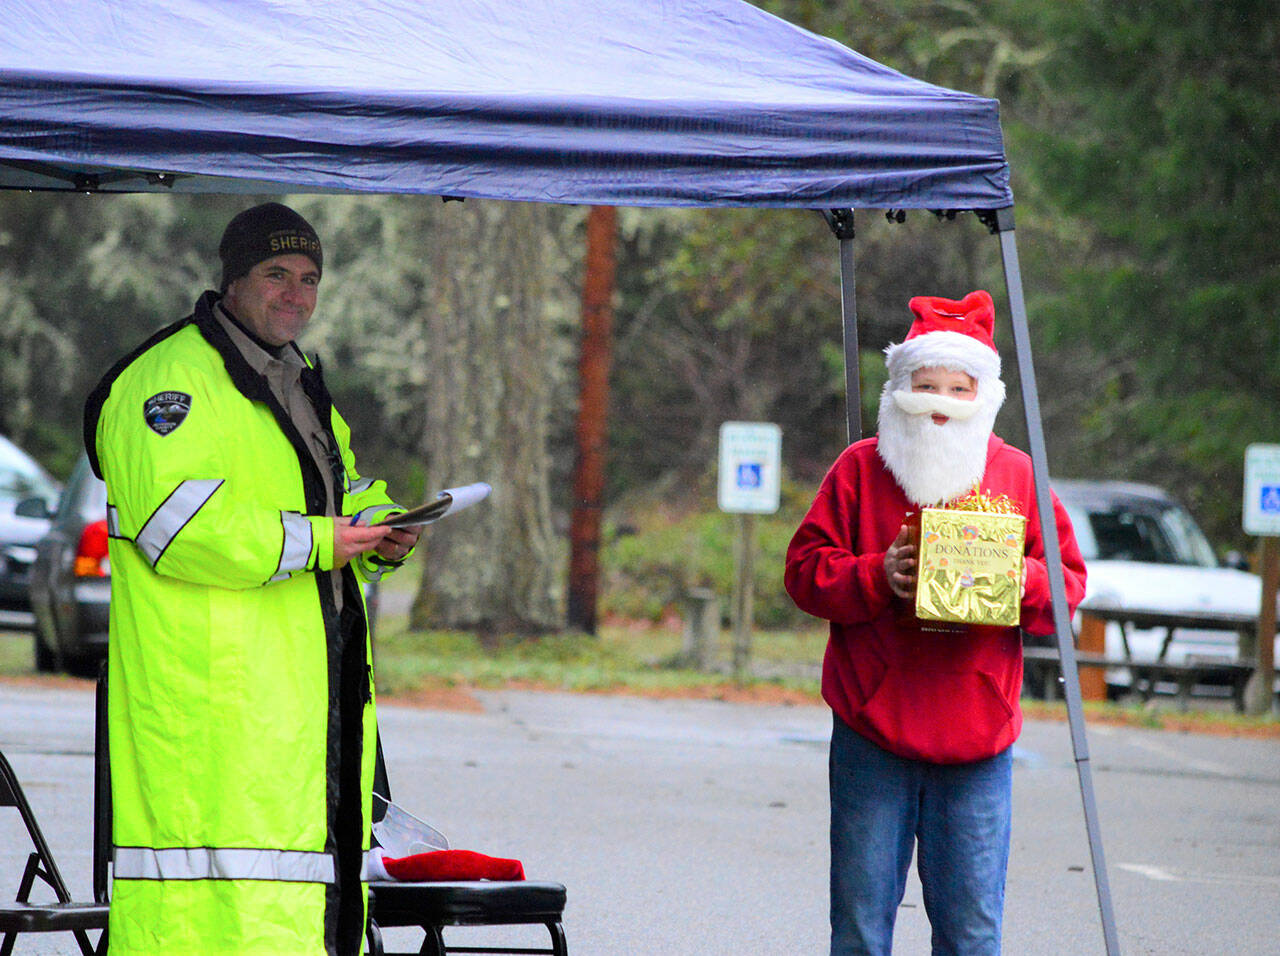 Jefferson County Sheriff’s Department Undersheriff Andy Pernsteiner, left, and Daltry Lammers, 12, of Chimacum greeted droves of people outside the Tri-Area Community Center in Chimacum on Saturday afternoon, where volunteers dished up 498 Christmas meals to go. Many people made reservations, organizer Rita Hubbard said, but quite a few called on Christmas Day asking if they could have a takeout dinner. “Come right now and we’ll get you fed,” Hubbard told the last-minute callers. (Diane Urbani de la Paz/Peninsula Daily News )